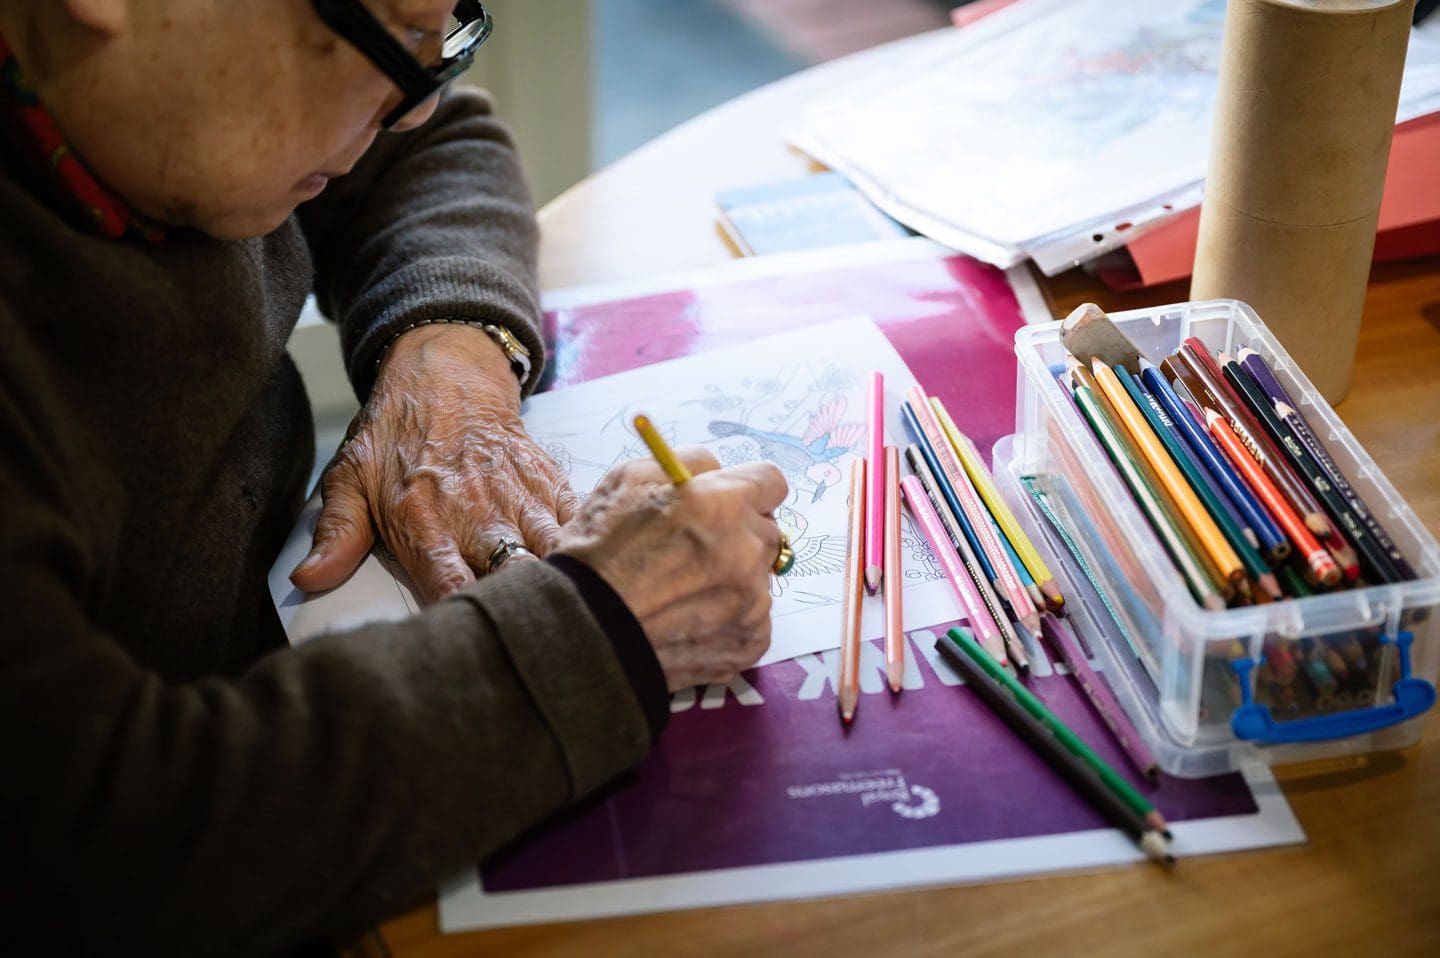 An older man is drawing at a table with colored pencils.